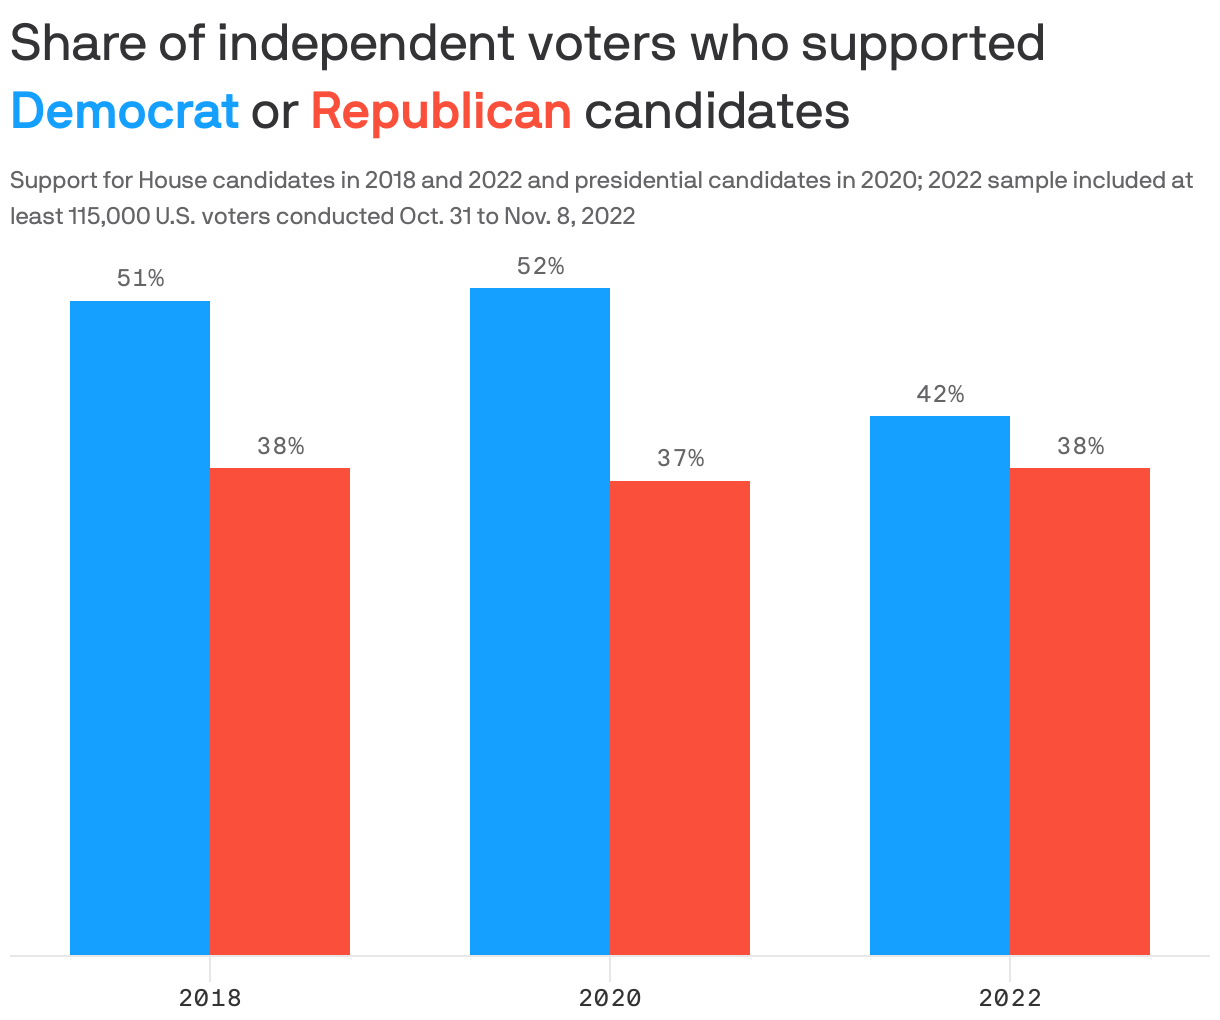 Share of independent voters who supported <strong style="color:#15a0ff;">Democrat</strong> or <strong style="color:#fa4f3b;">Republican </strong> candidates